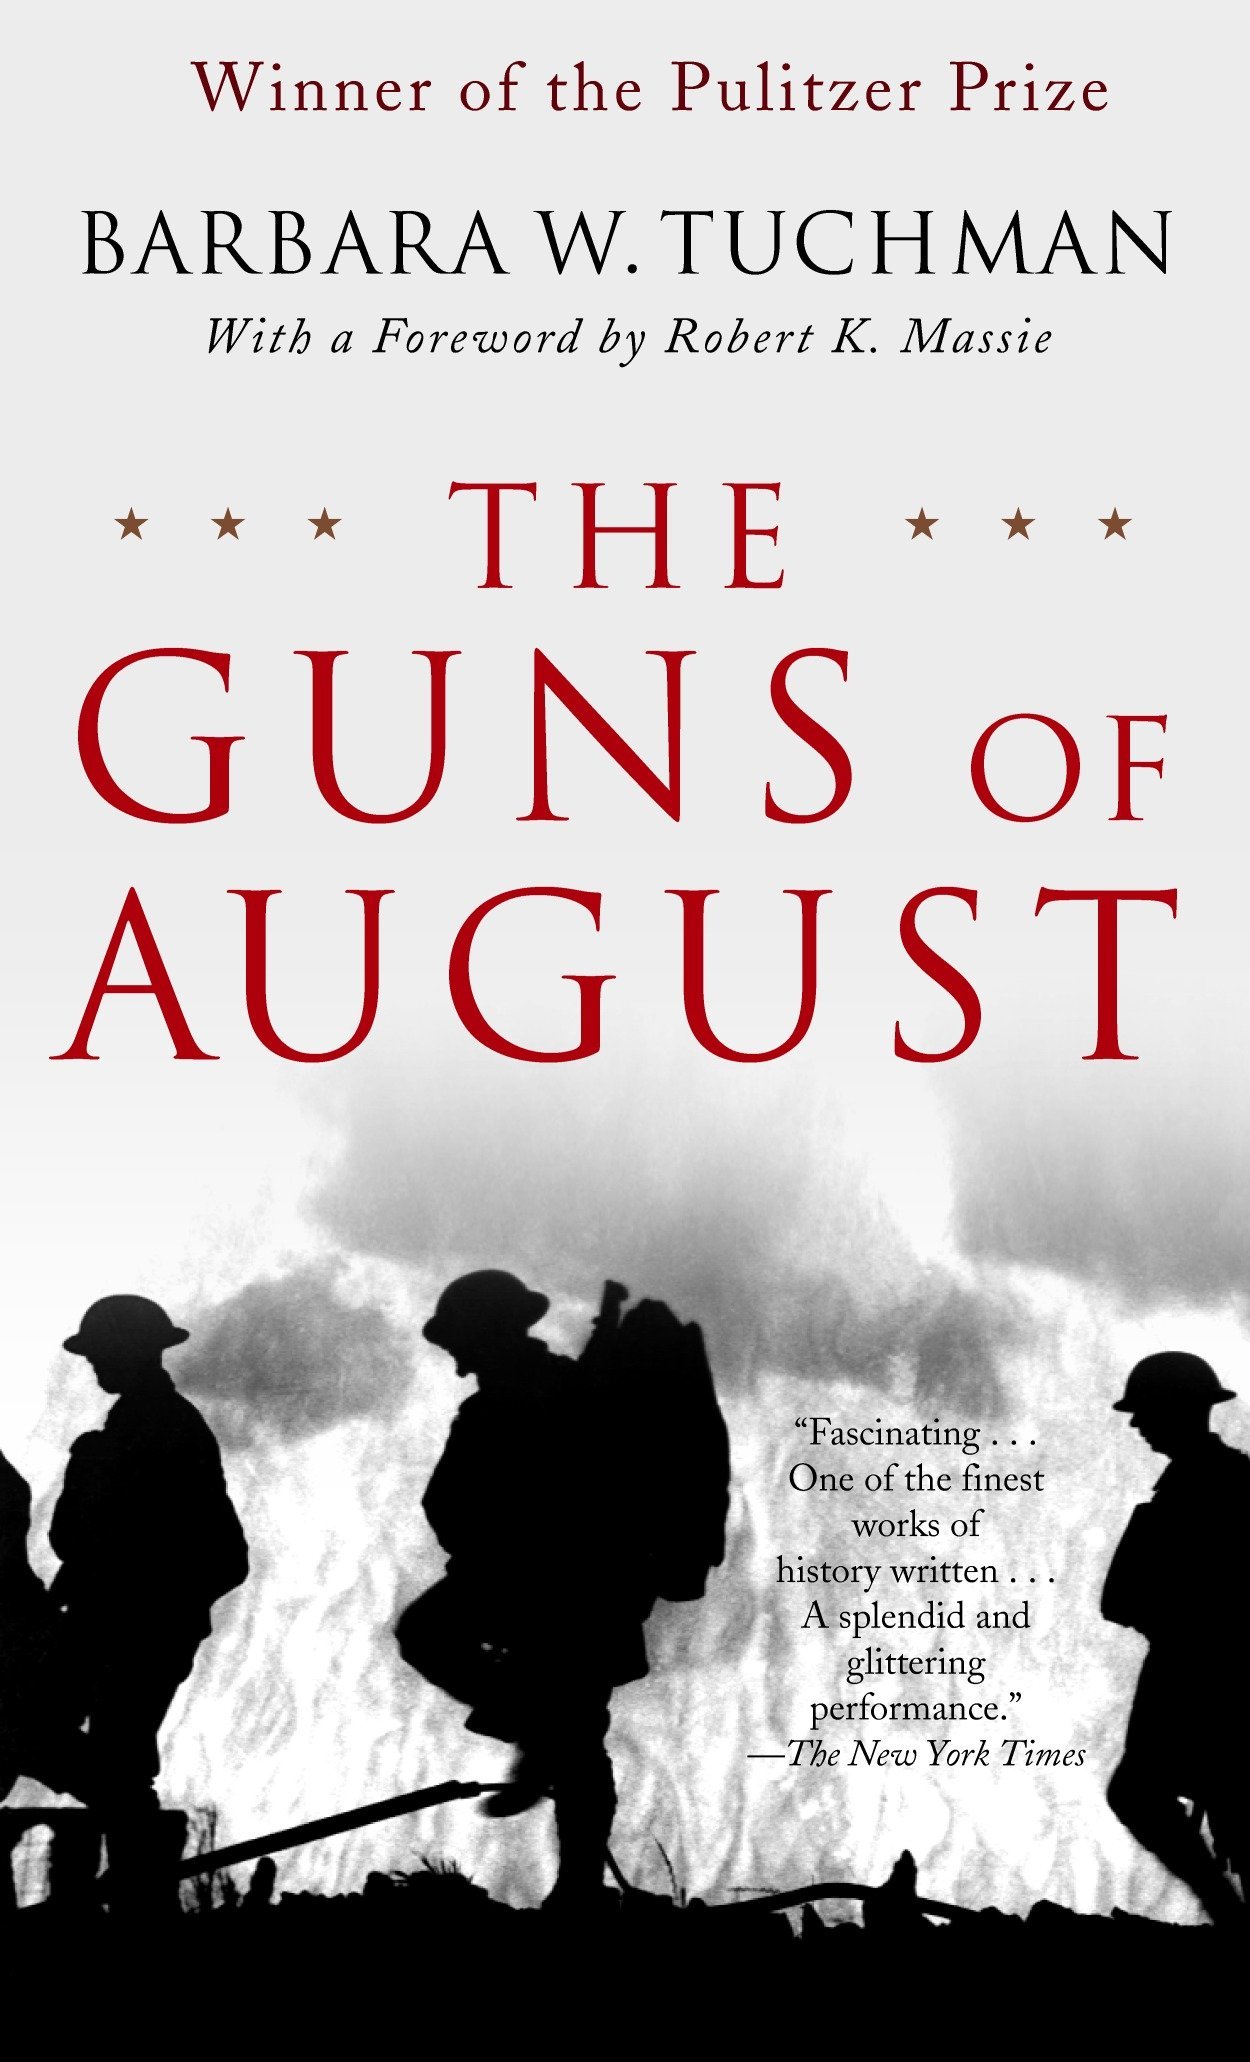 Cover of "The Guns of August" by Barbara Tuchman